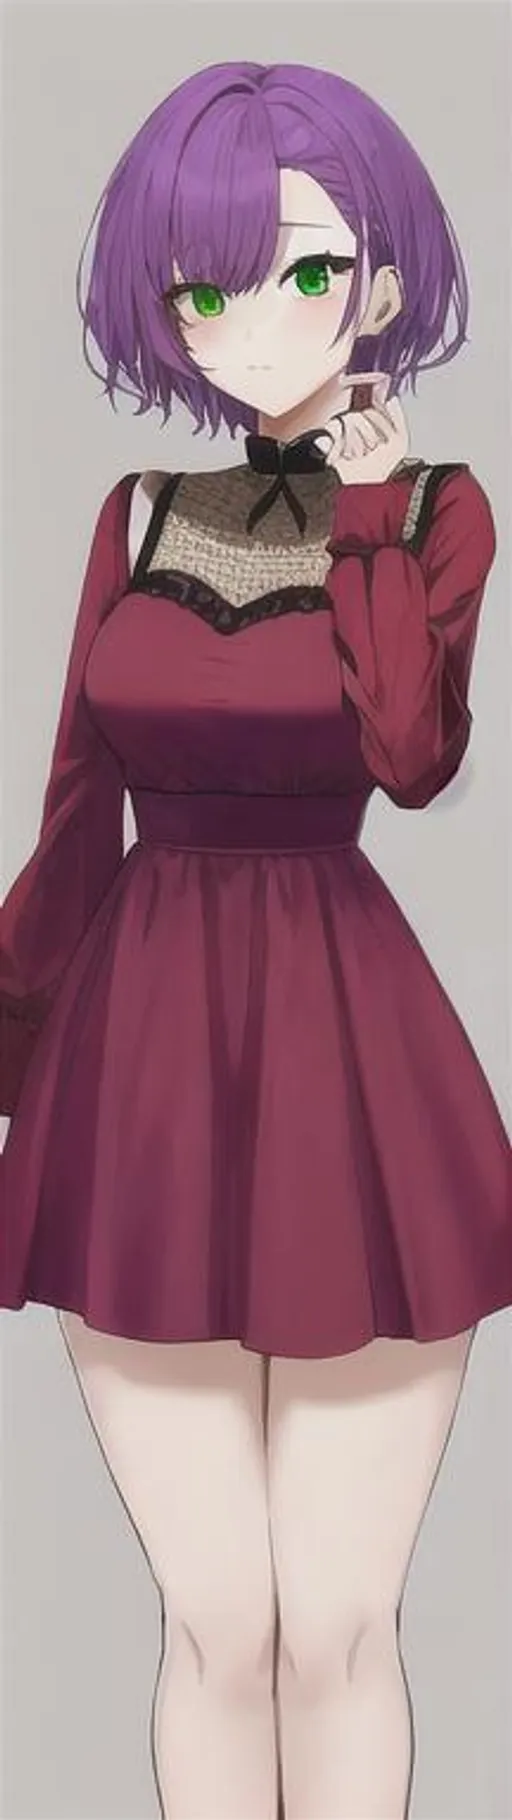 Prompt: A portrait of a cute girl with short, purple hair and green eyes wearing a red dress 